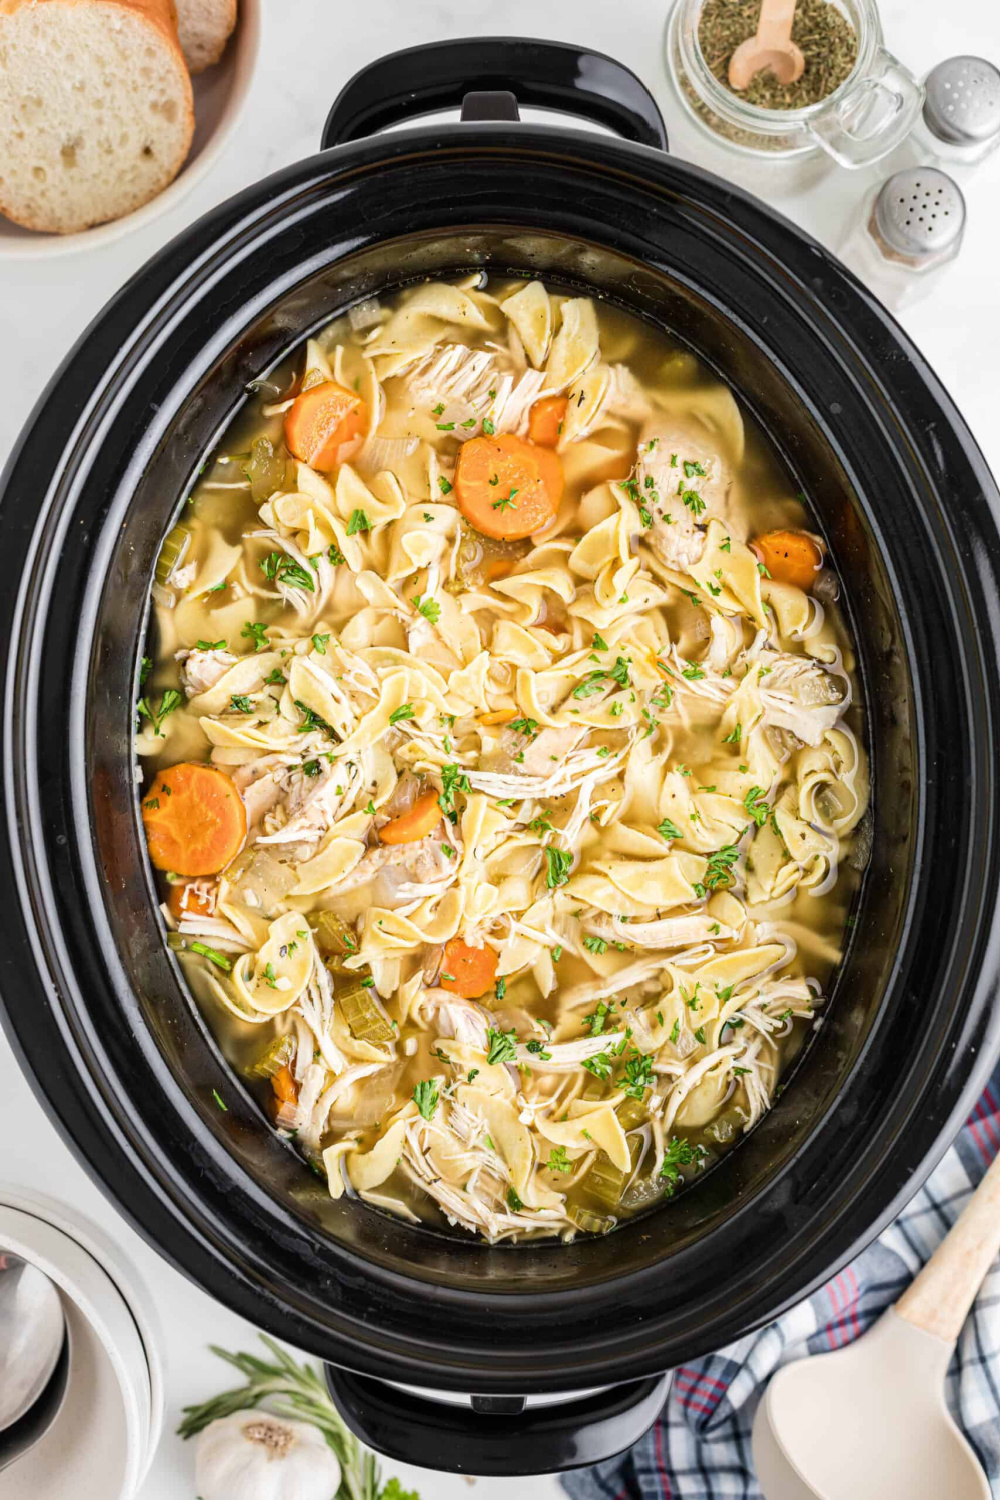 Easy Homemade Crockpot Chicken Noodle Soup